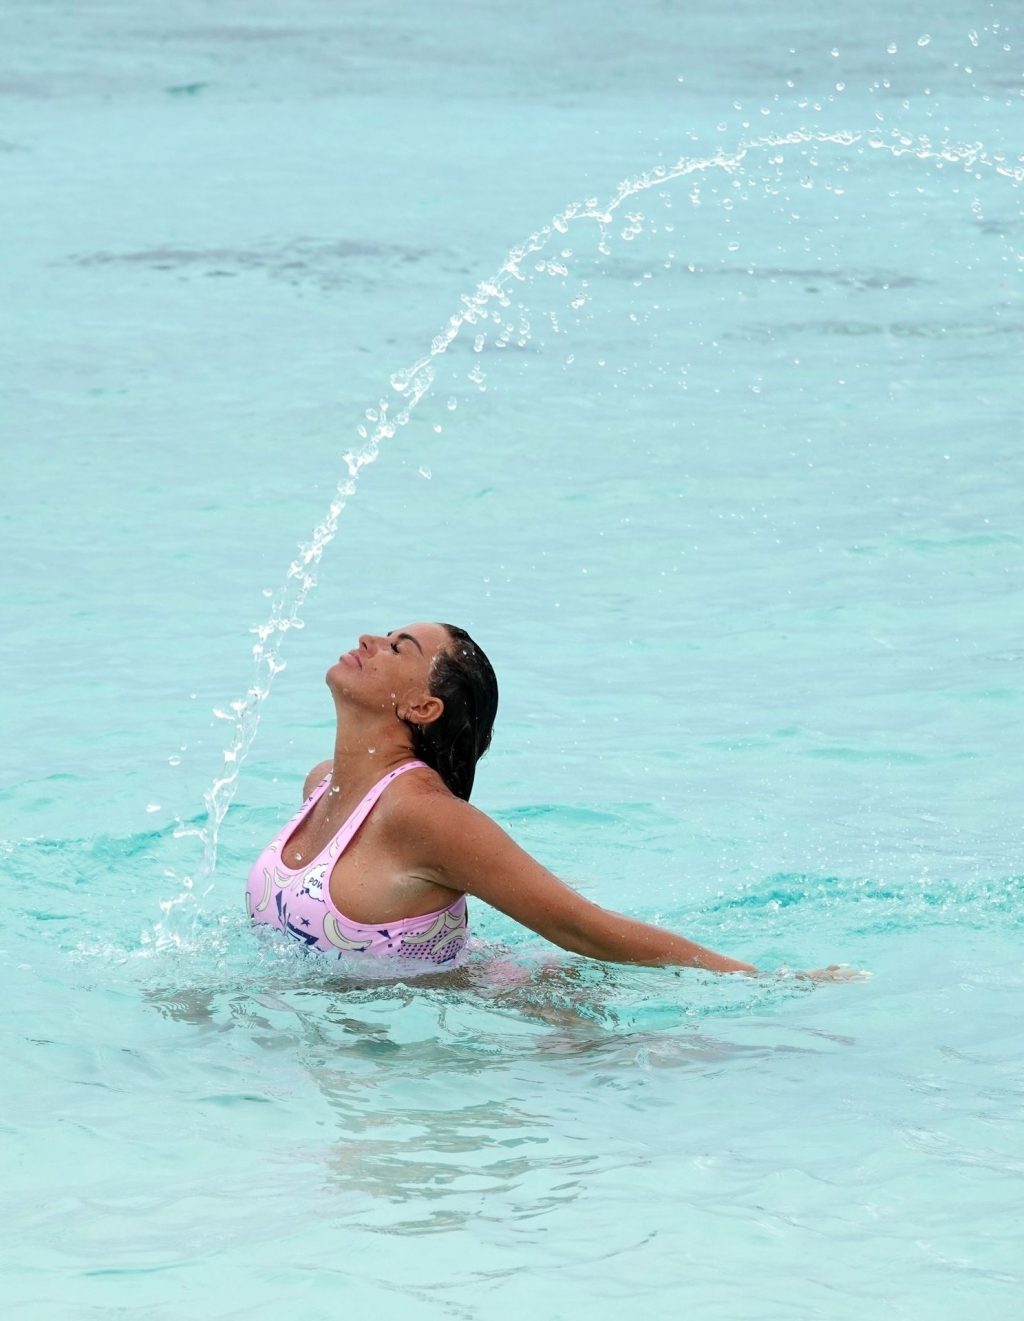 Katie Price &amp; Carl Woods Make a Splash in the Sea in the Maldives (65 Photos)